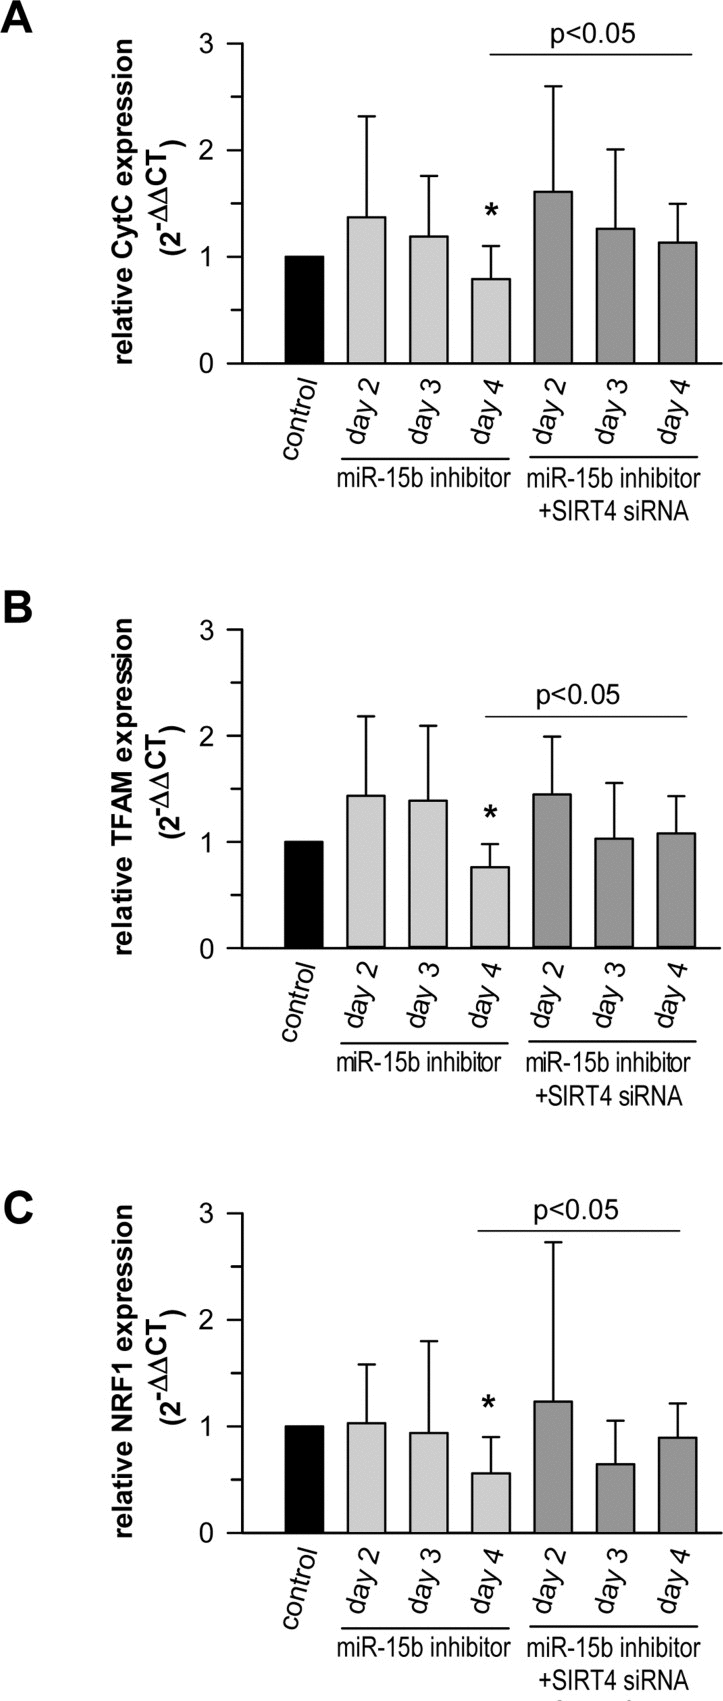 The miR-15b - SIRT4 axis regulates the expression of nuclear encoded mitochondrial genes